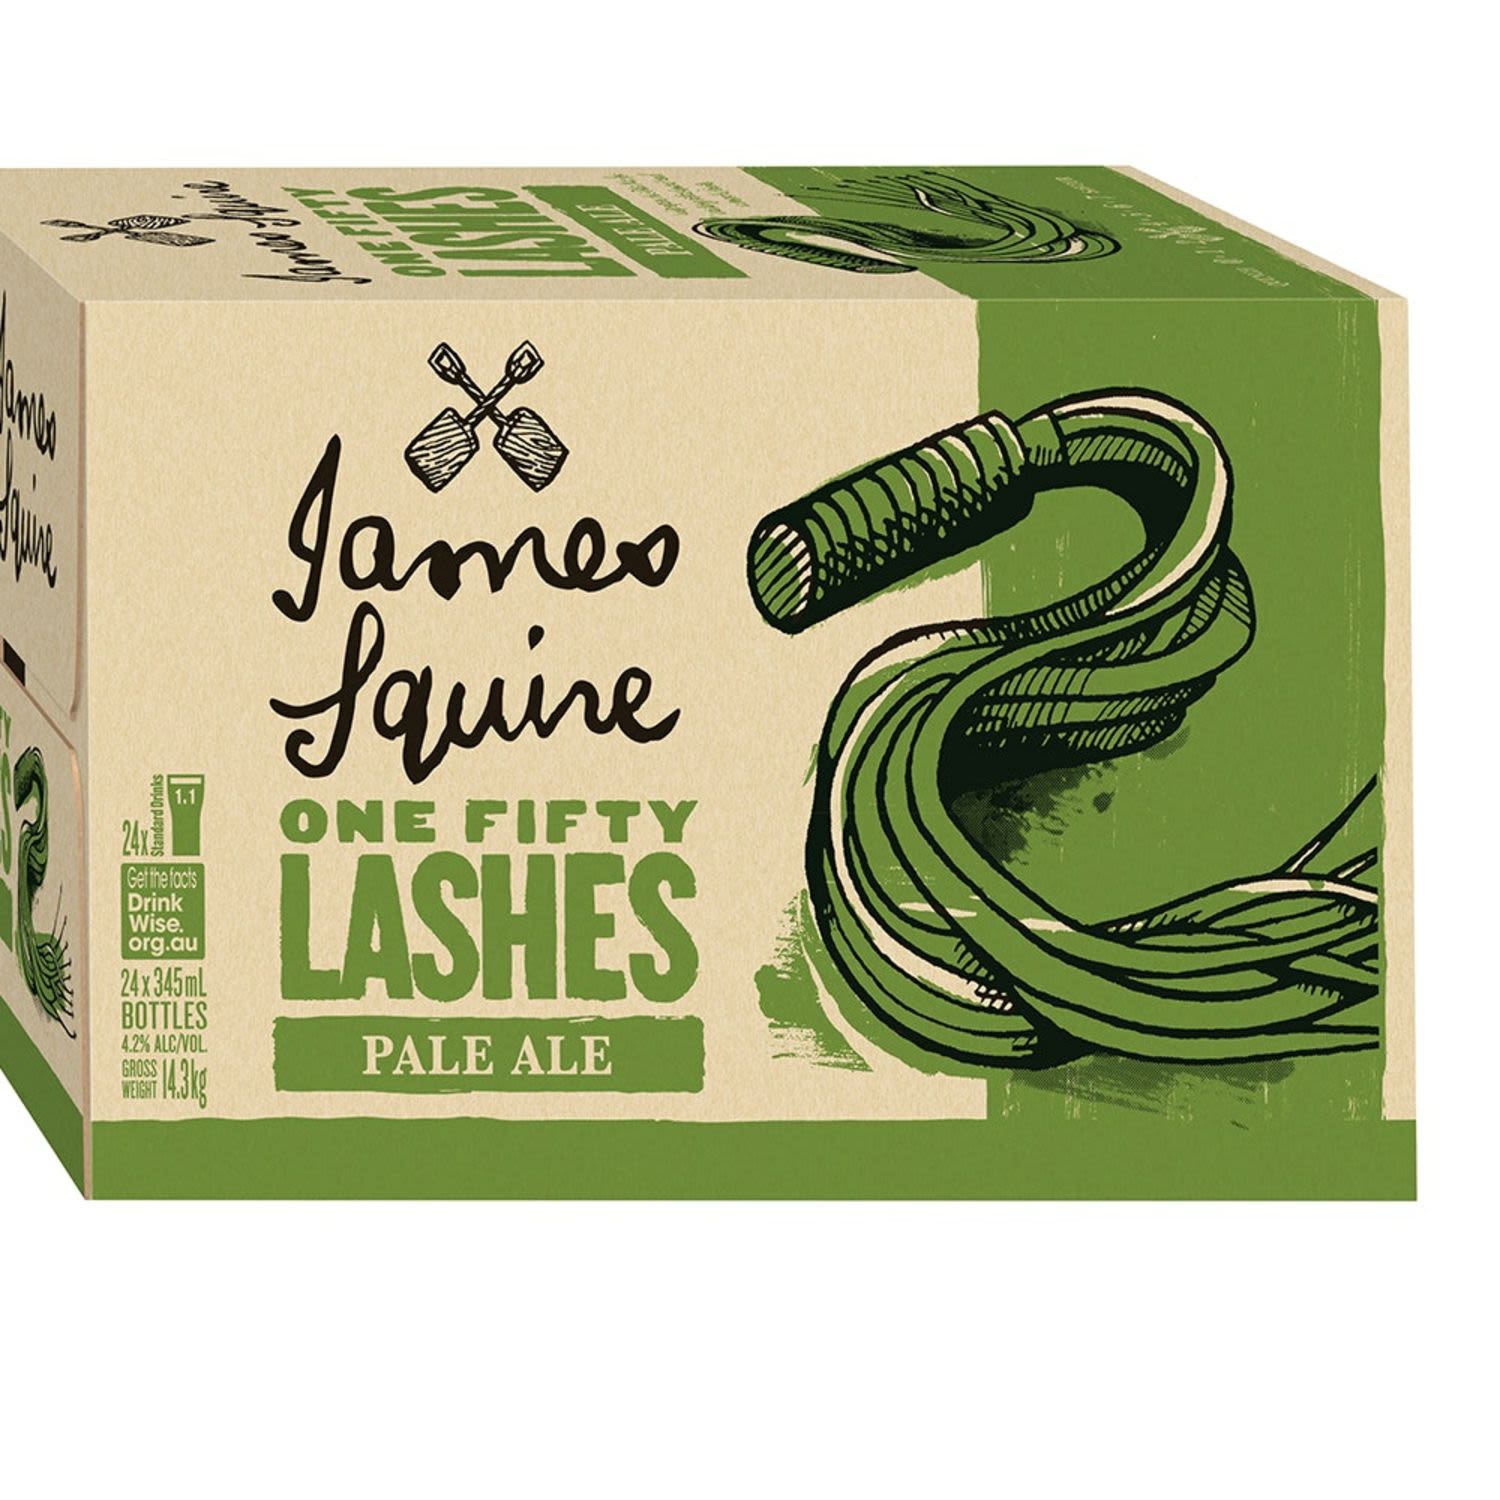 James Squire One Fifty Lashes Bottle 345mL 24 Pack